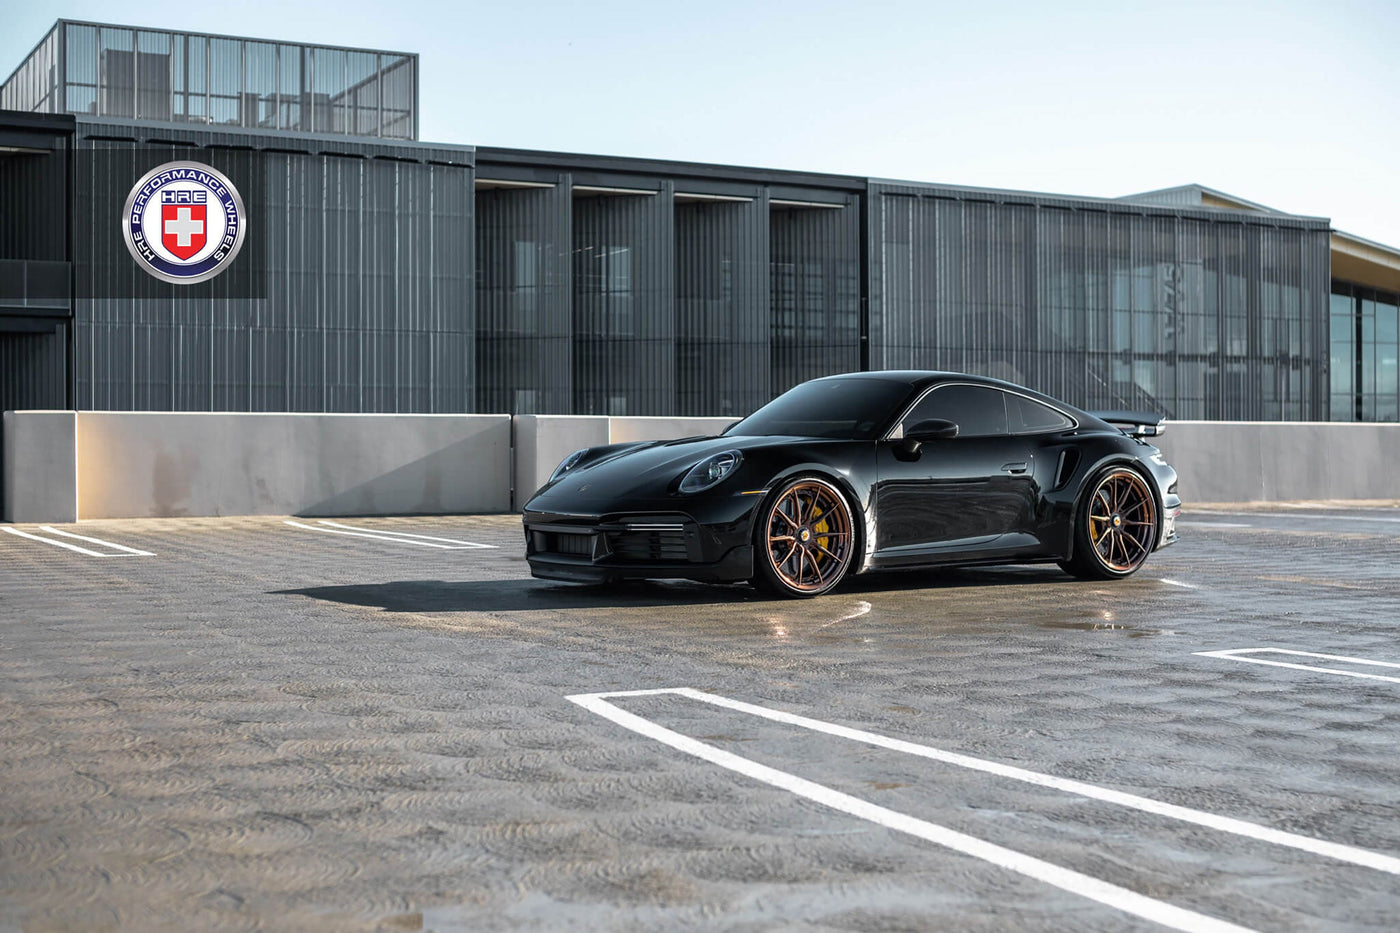 Porsche 992 Turbo S with HRE S104SC in Frozen Polished Bronze in 21 inch front and 22 inch rear.